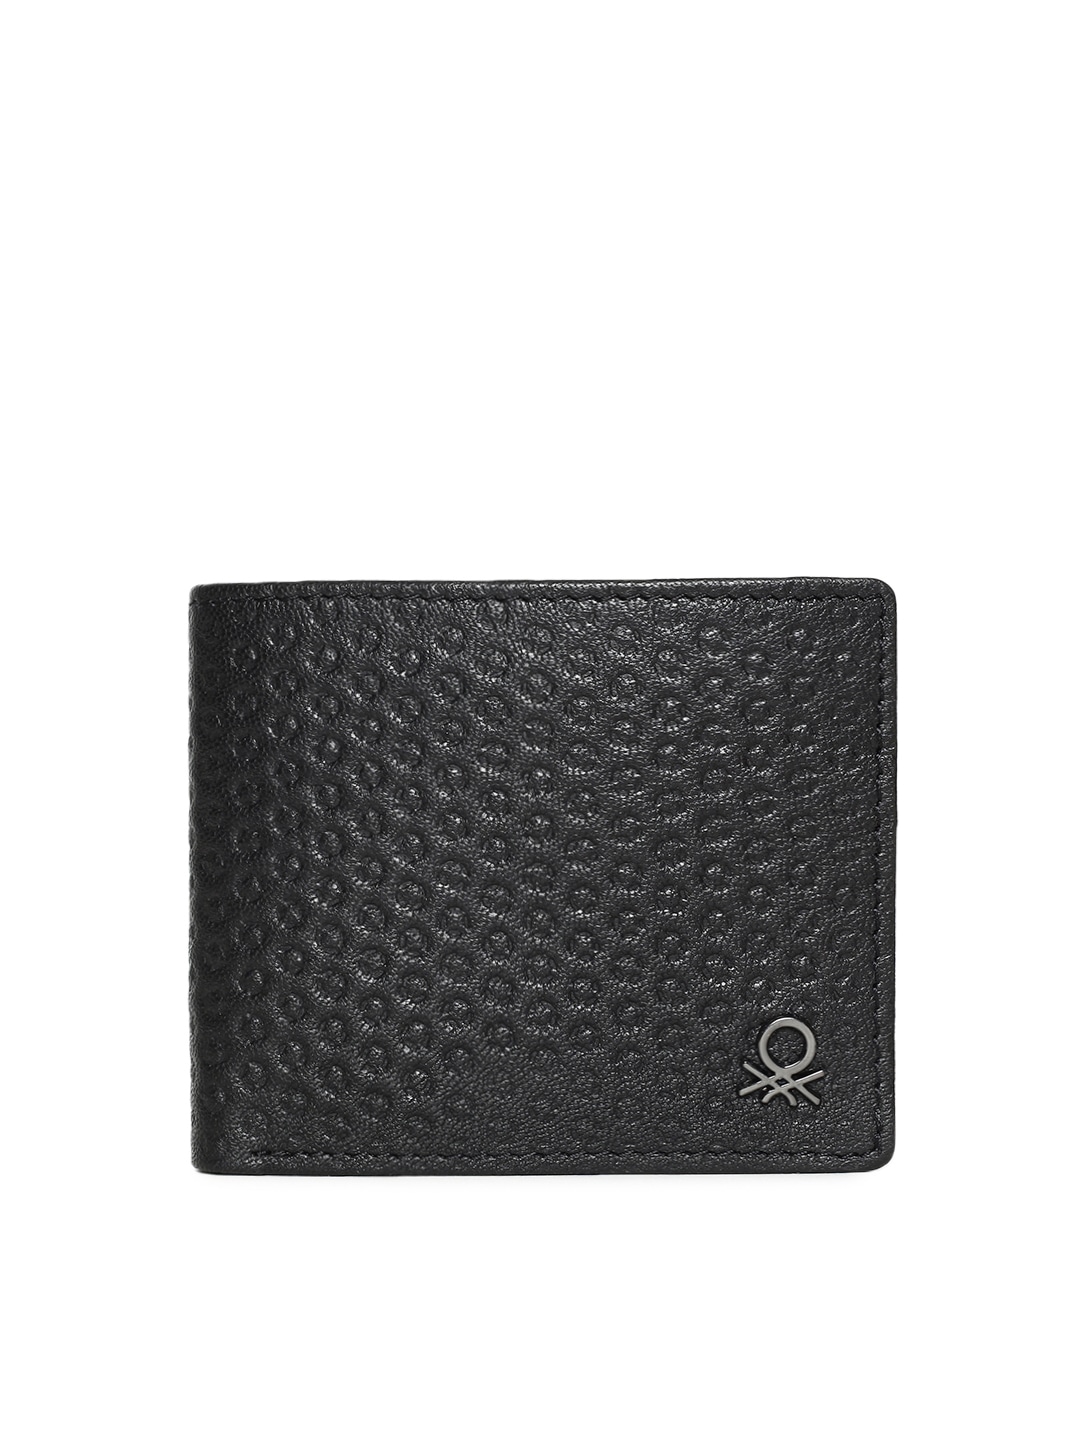 United Colors of Benetton wallet for men